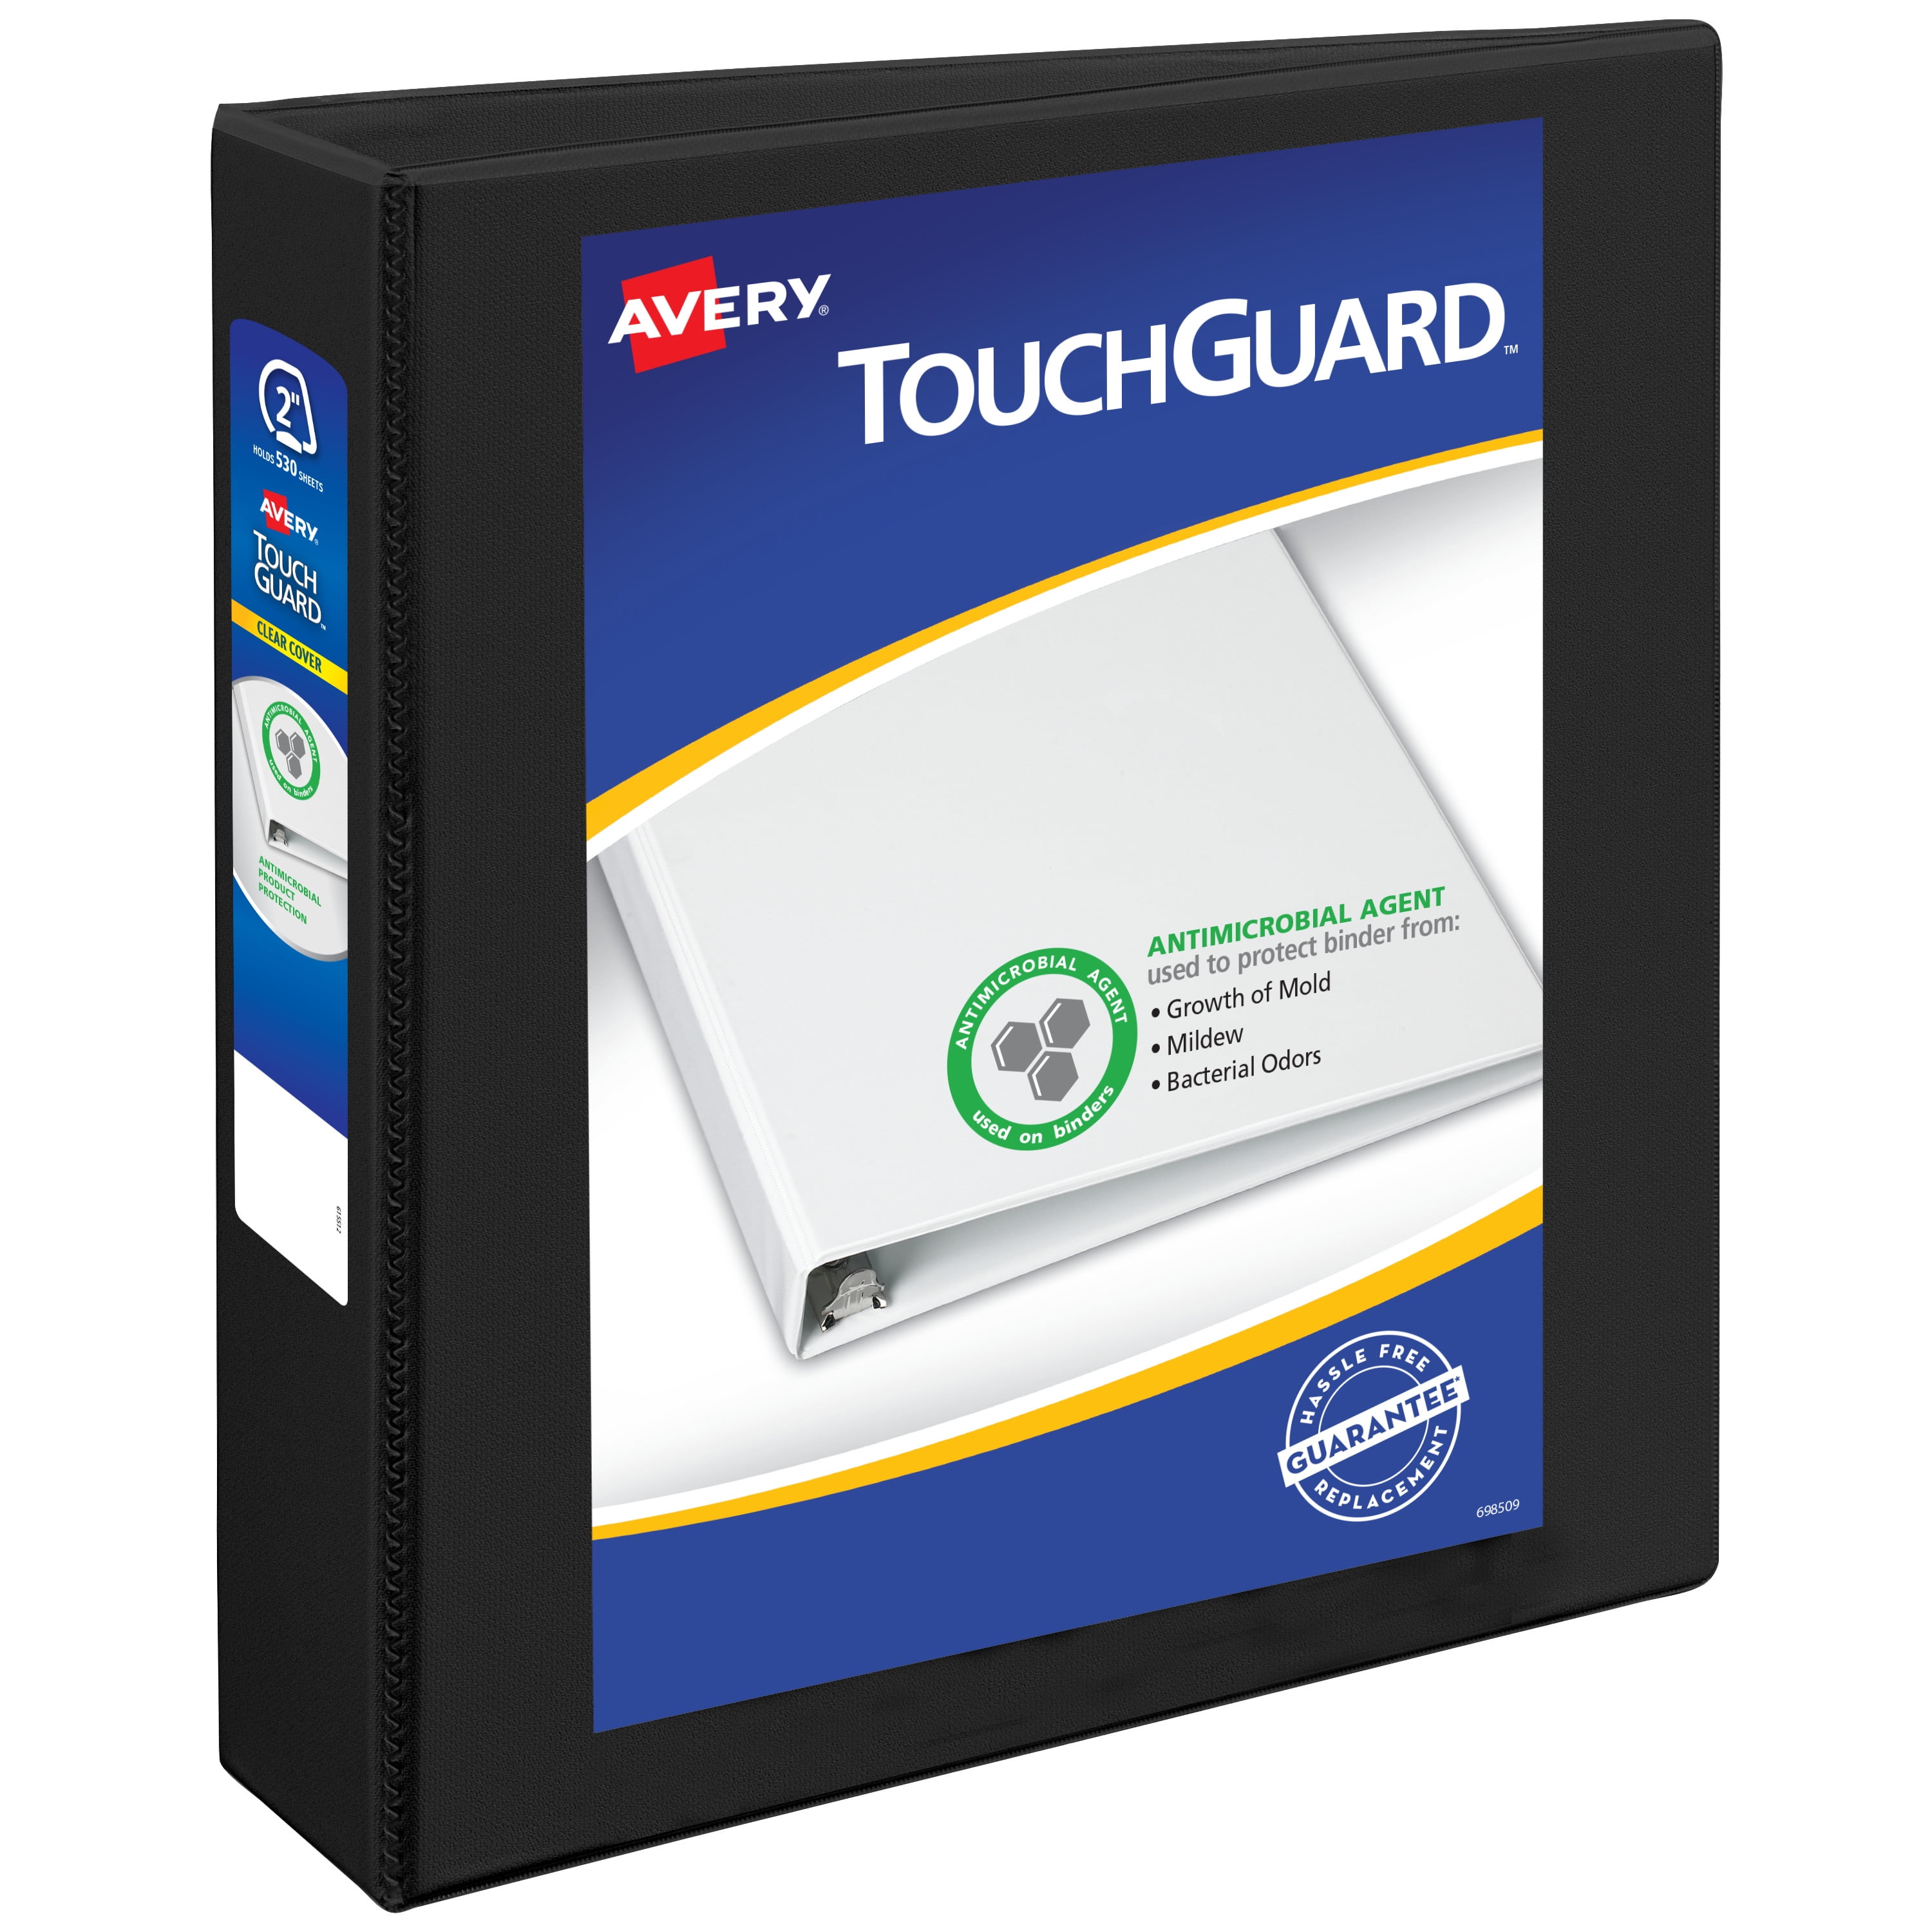 Avery TouchGuard Protection View 3 Ring Binder Clear View Cover 2 Slant Rings 1 White Binder 17143 6ad84a14 0a45 4387 8dde 7fe7db120fb2.2e06449505a418b7718a05a740f62314